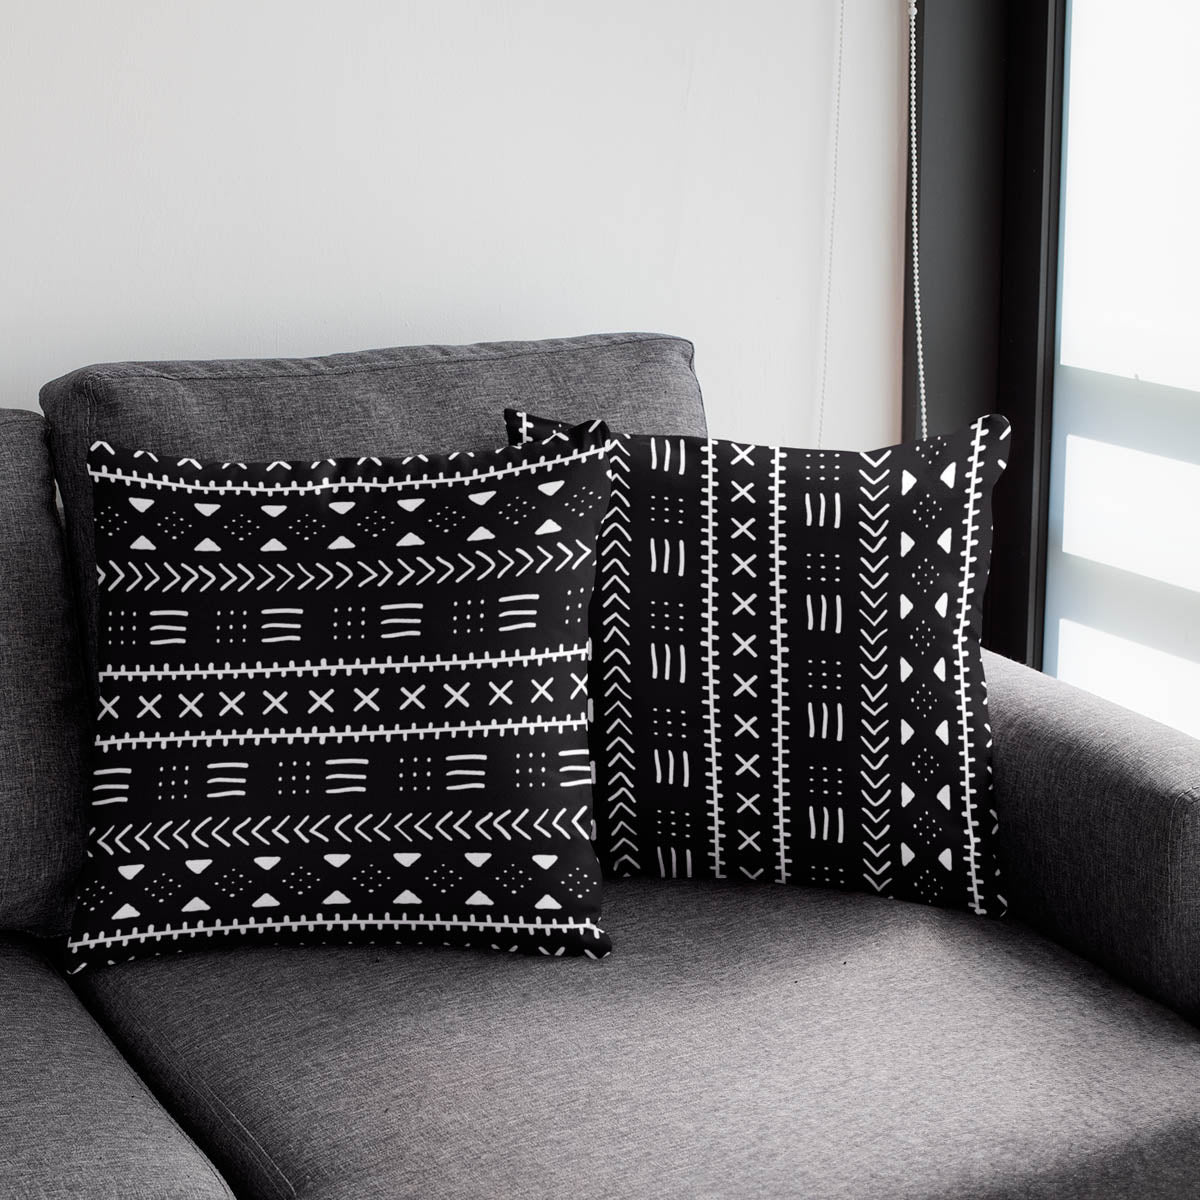 2 Sets of Tribal Cushions: Enchanting Pillow & Throw Covers